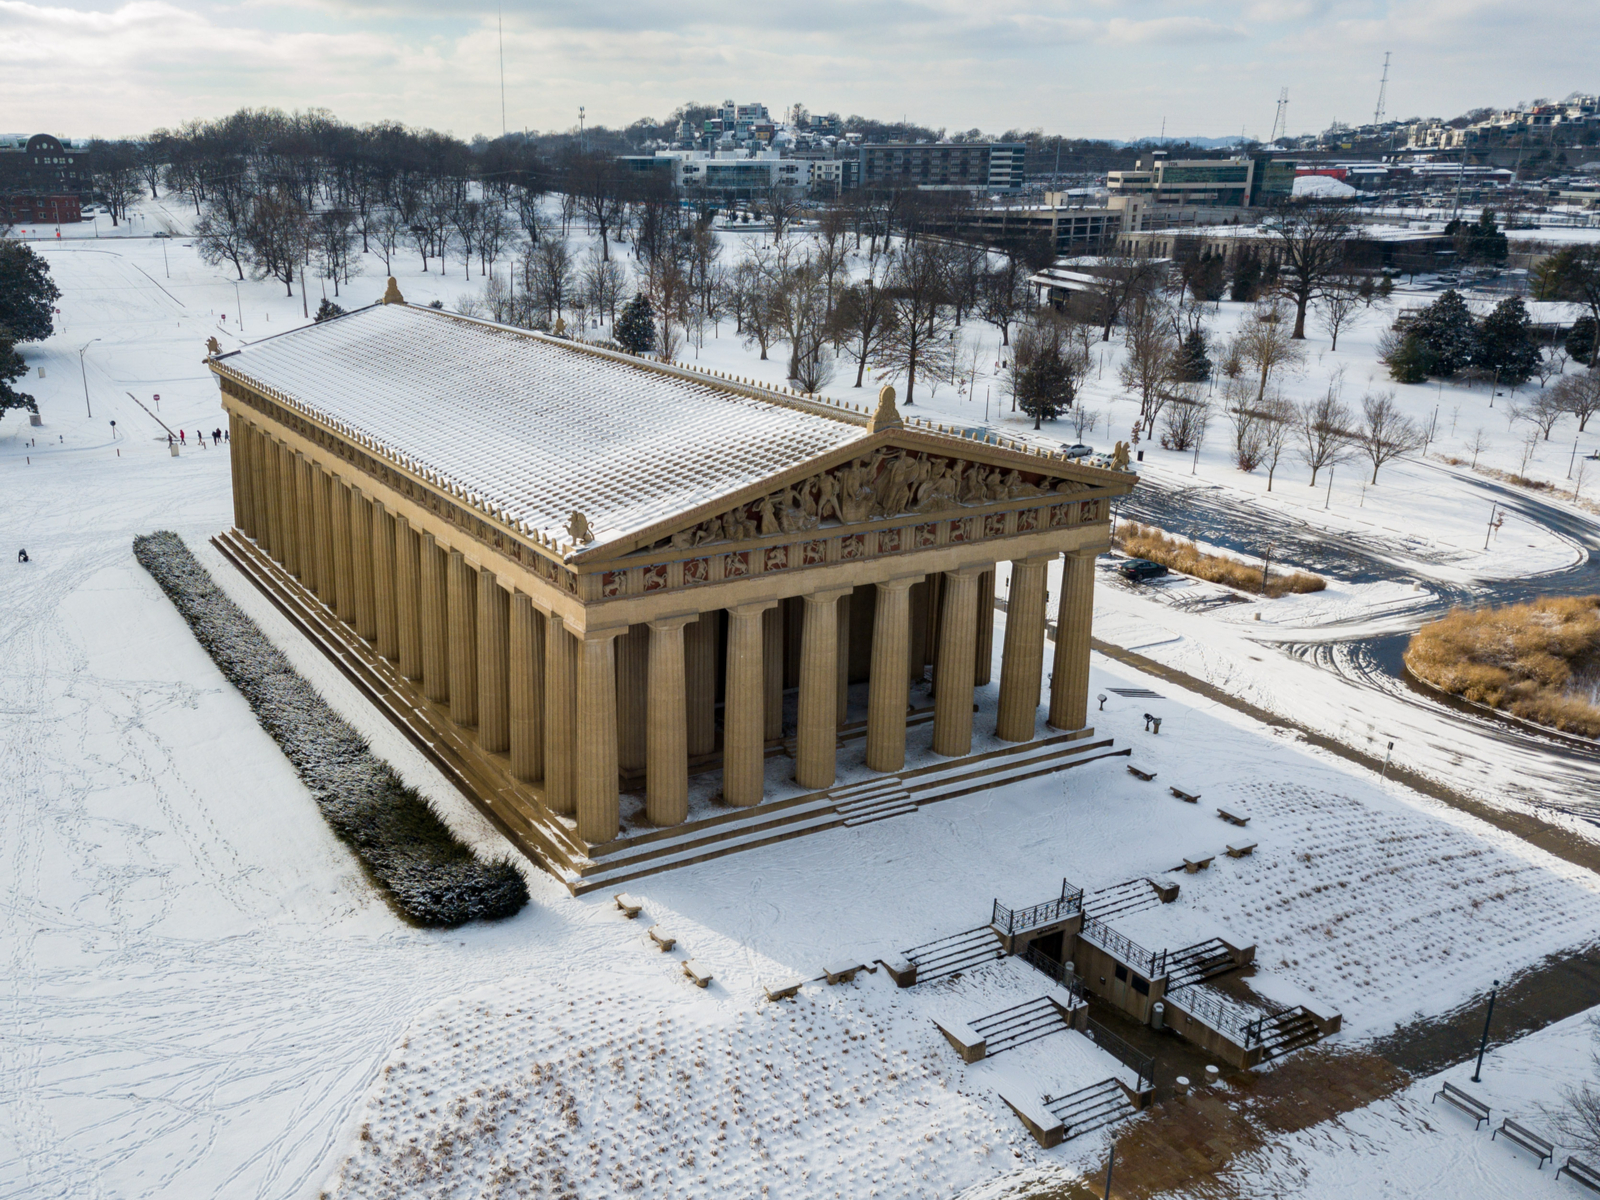 Parthenon pictured in an aerial shot during the worst time to visit Nashville, with snow on the ground